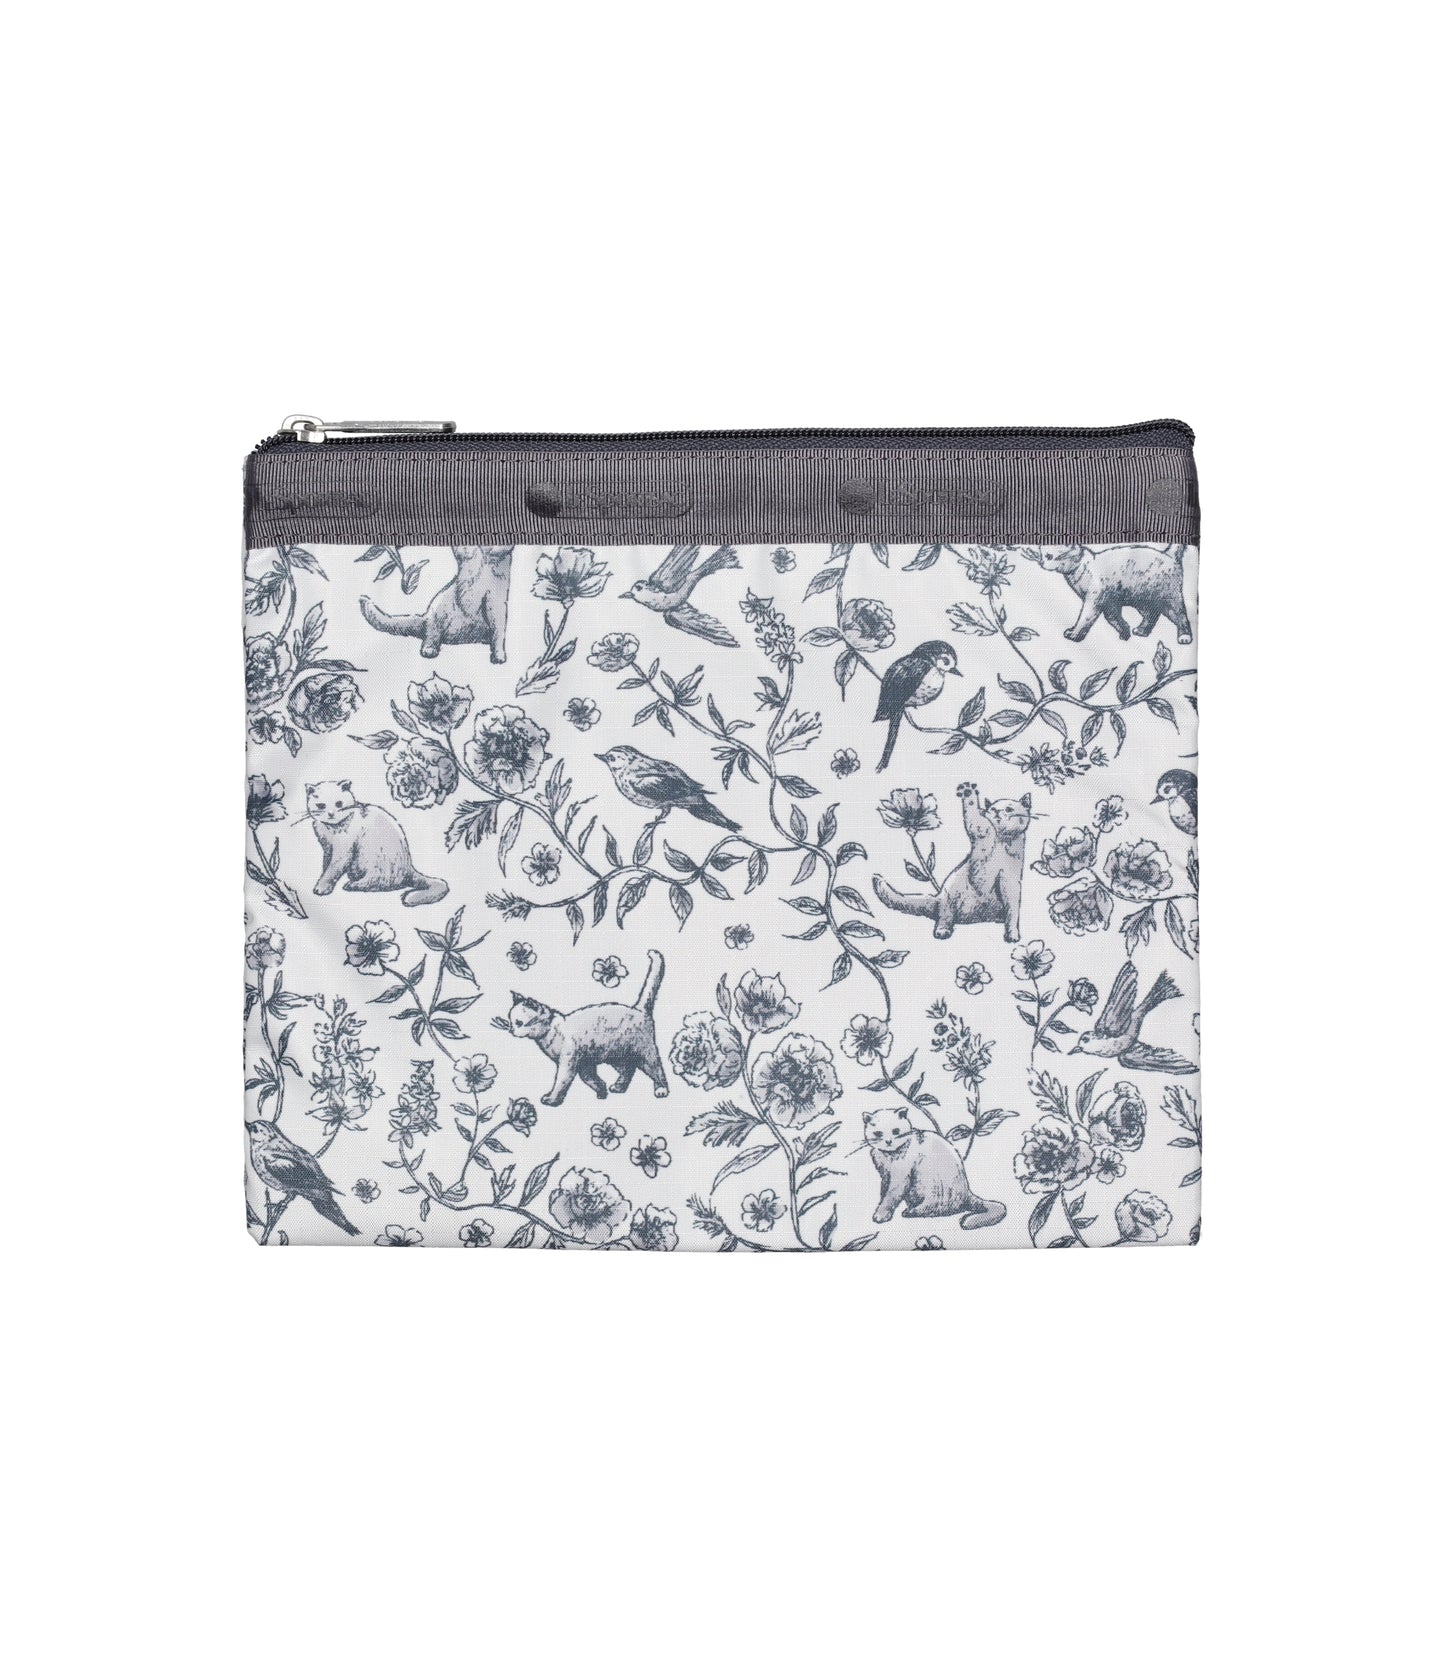 Deluxe Everyday Bag<br>Floral Birds And Cats